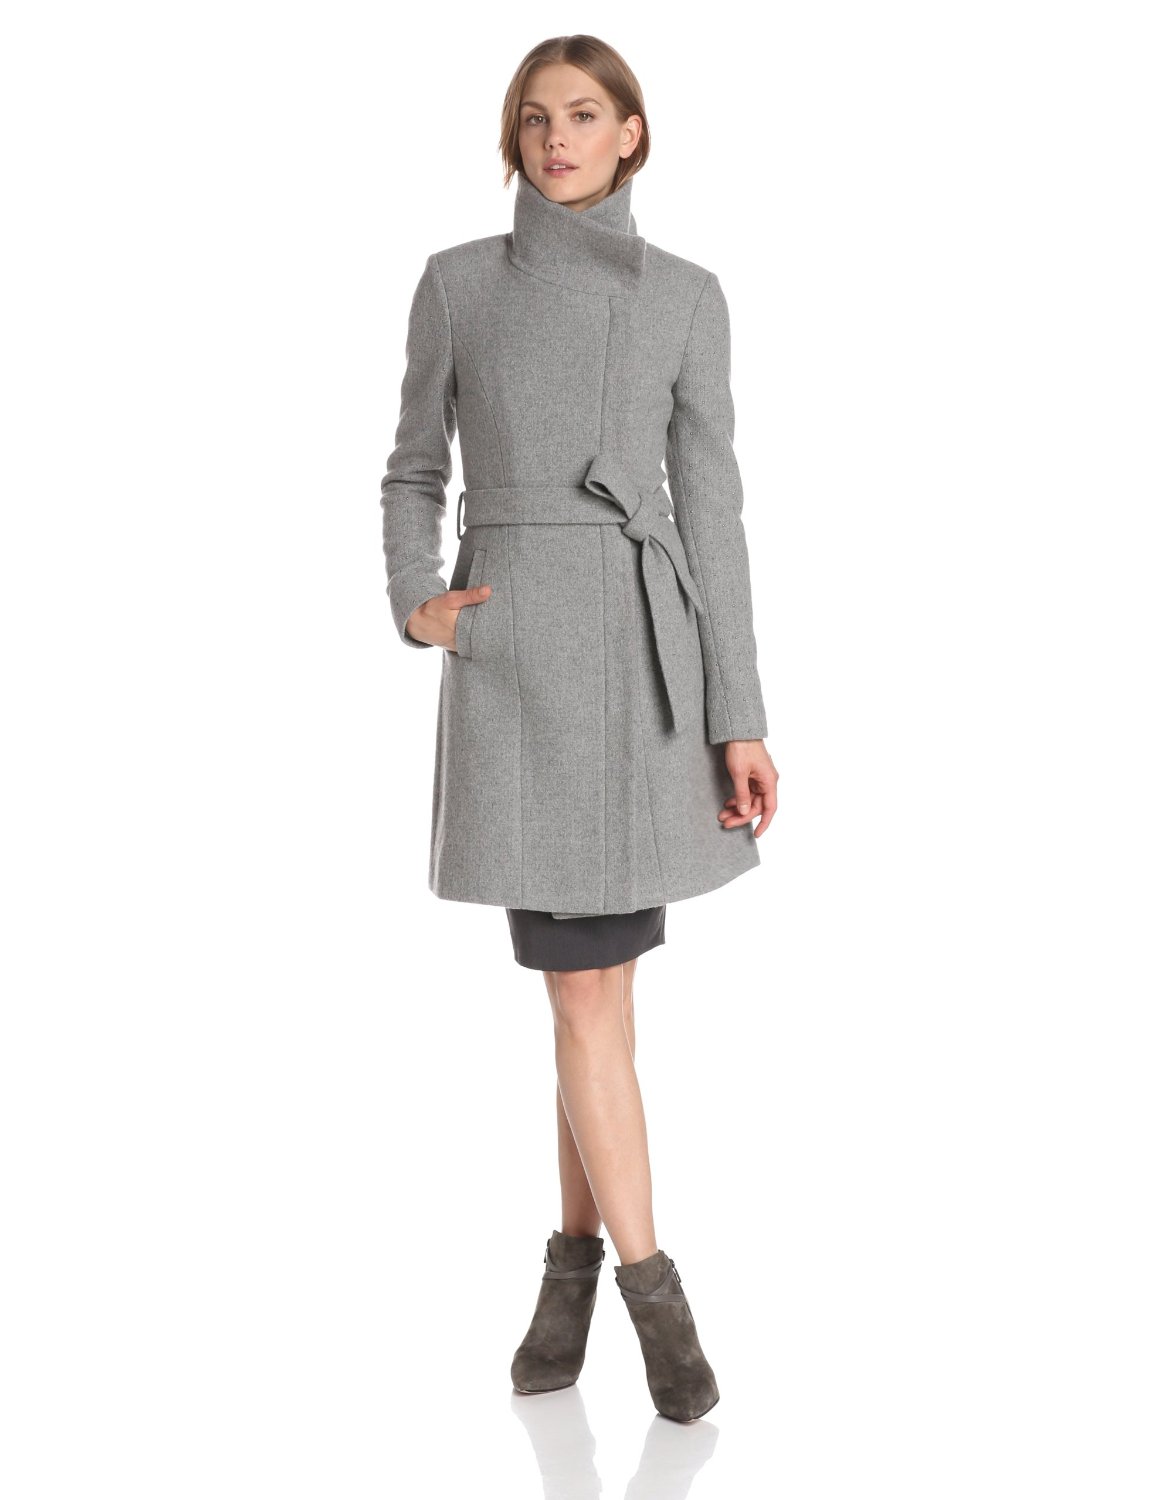 A Collection of Belted Coats Perfect for Fall